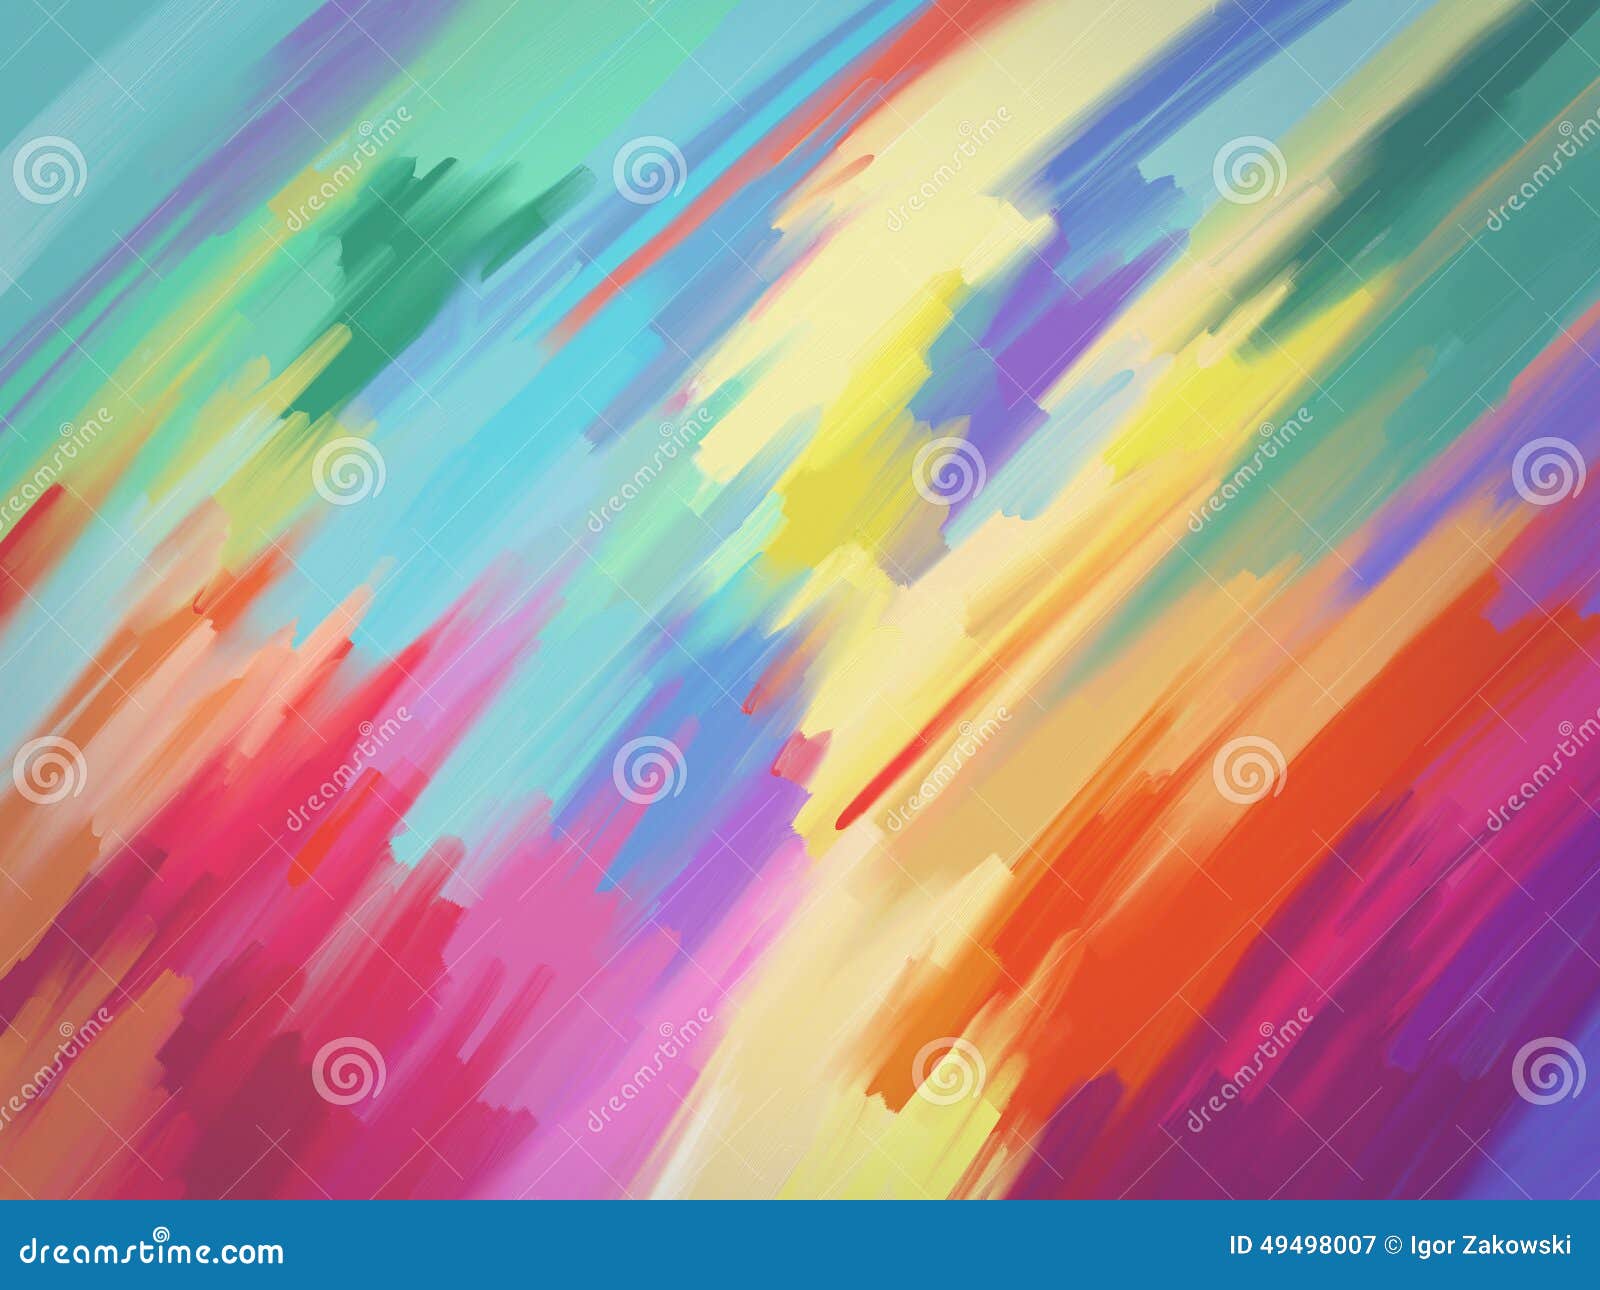 Digital Painting Abstract Background Stock Illustration - Illustration of  vibrant, painting: 49498007